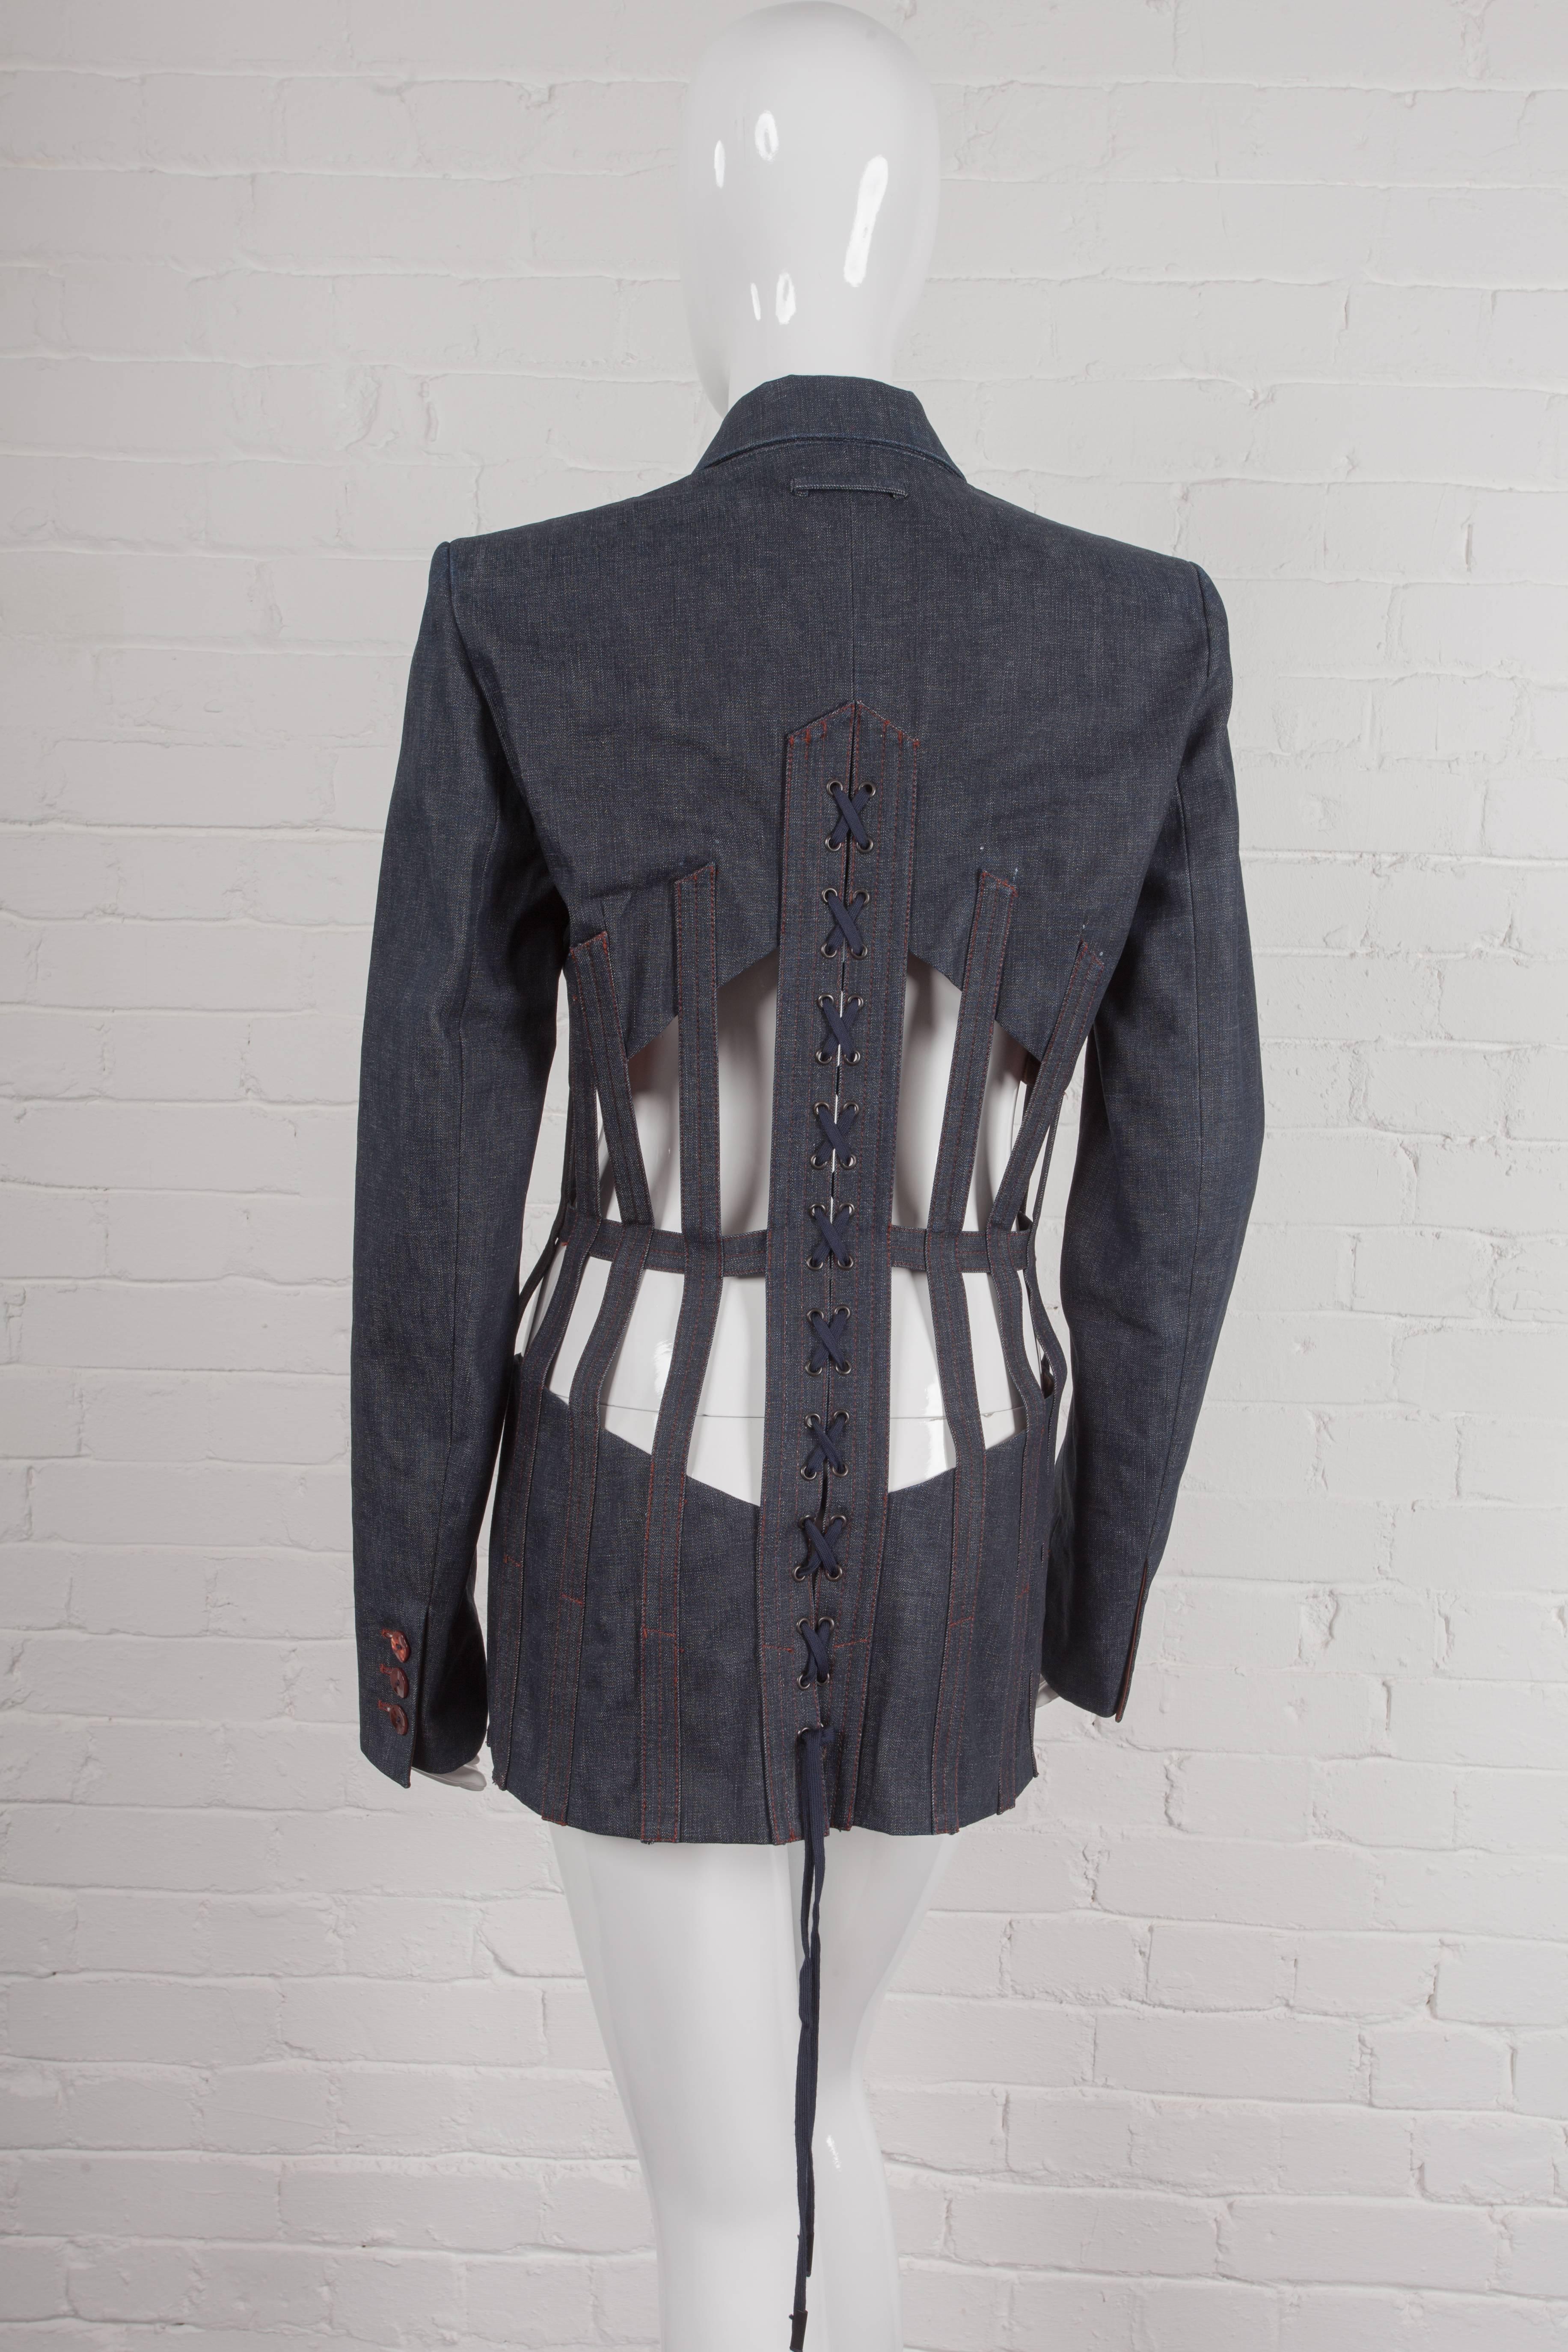 Jean Paul Gaultier Iconic 1989 “Les Rap’Pieuses” cage denim jacket In Excellent Condition For Sale In London, GB